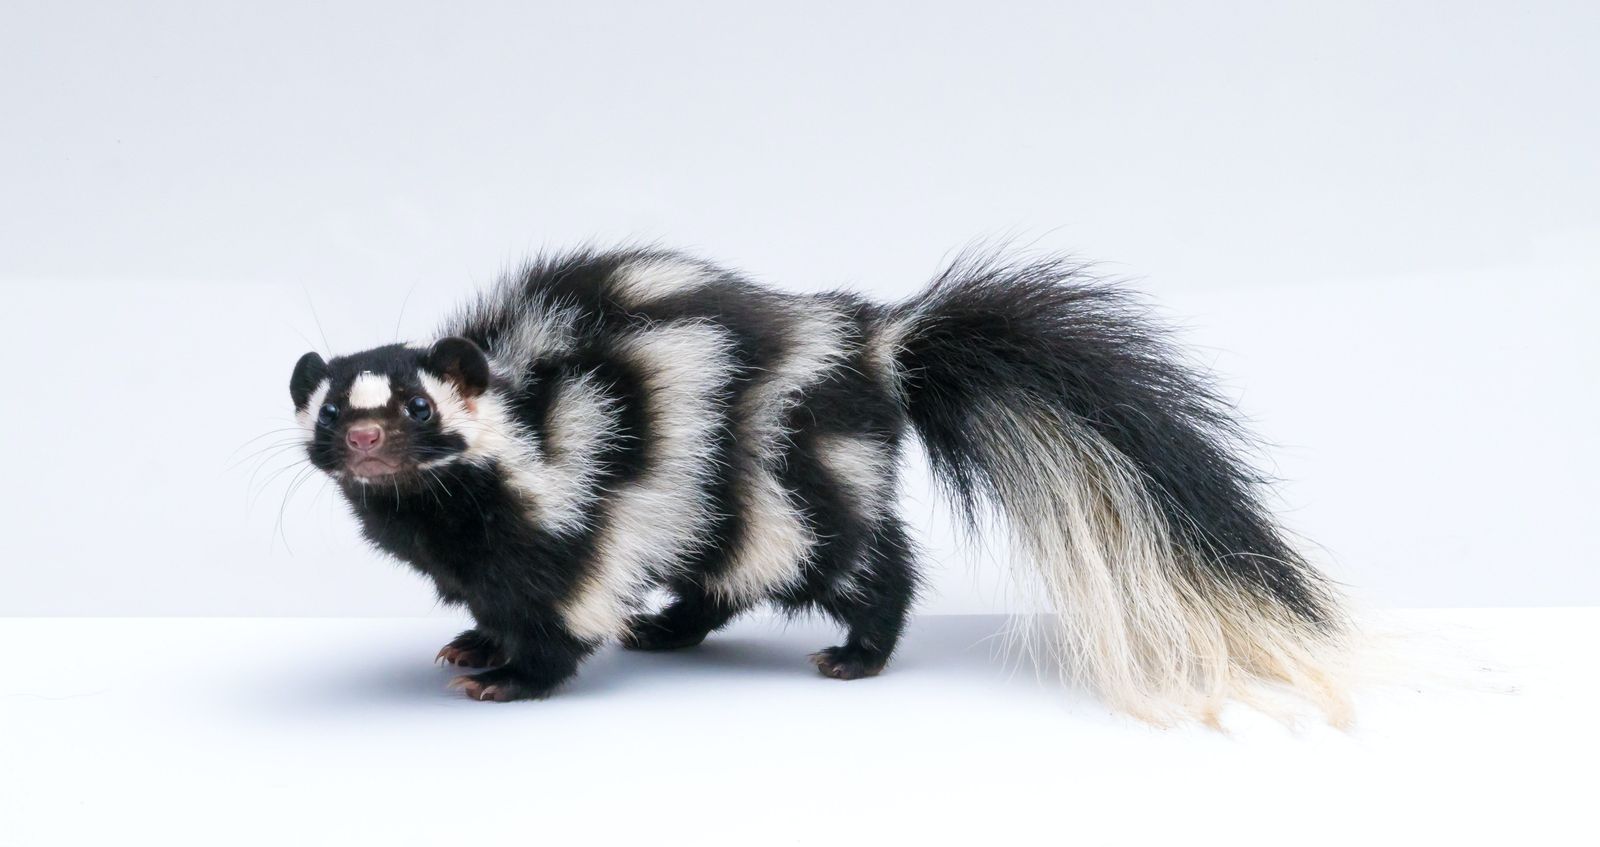 Skunks, Snakes, and Porcupines - Oh, my! - Vetster